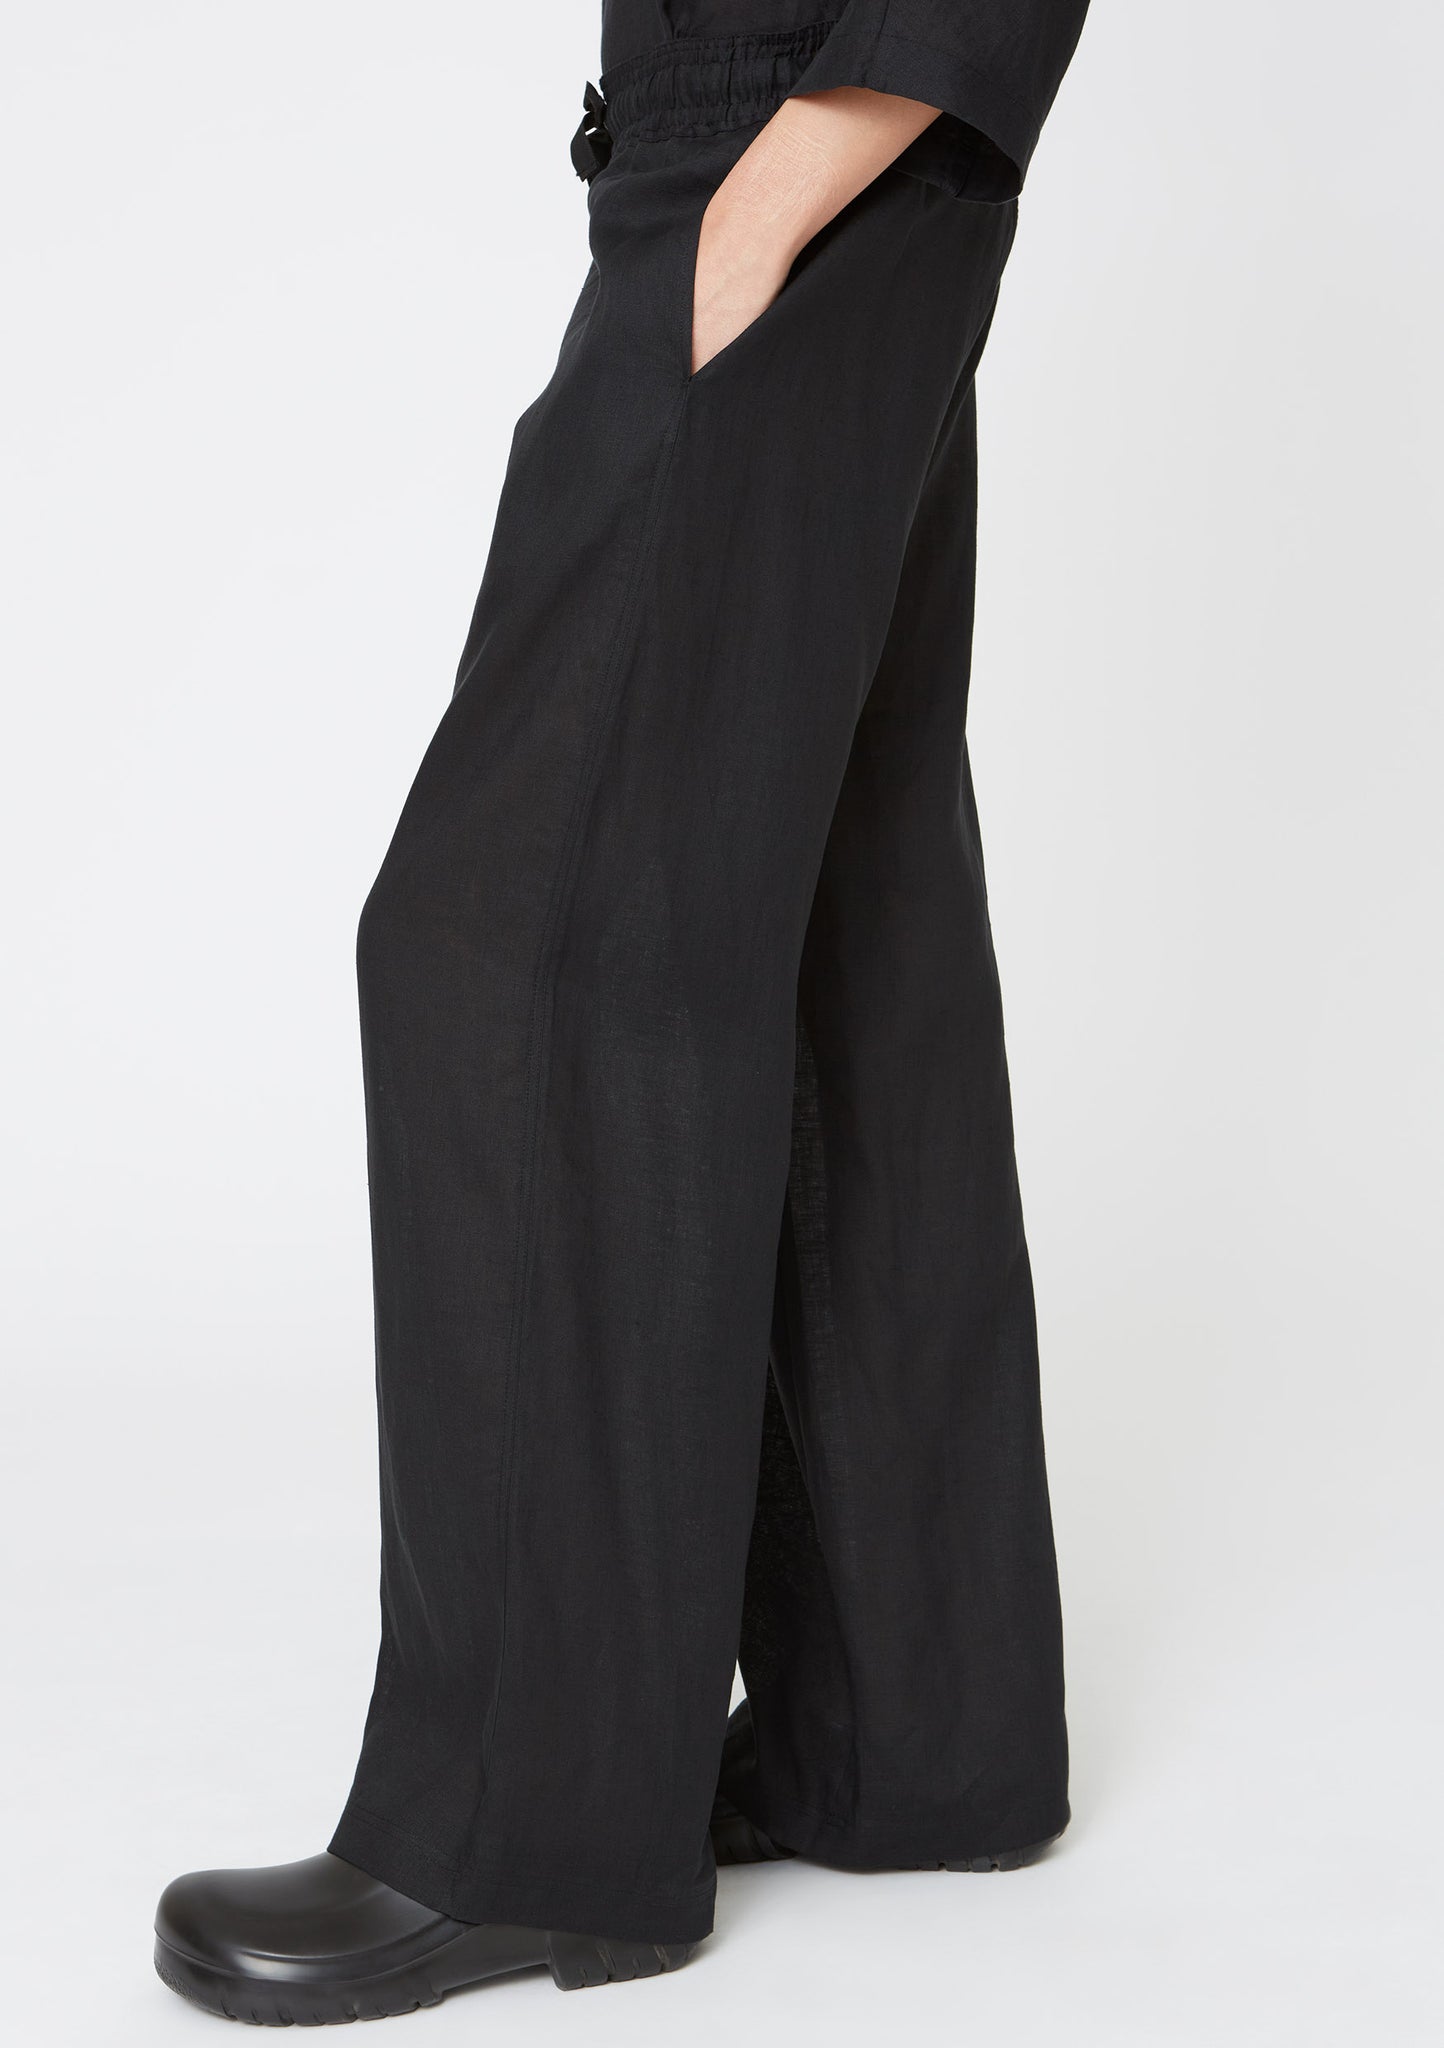 Dance Trousers in black by Hope